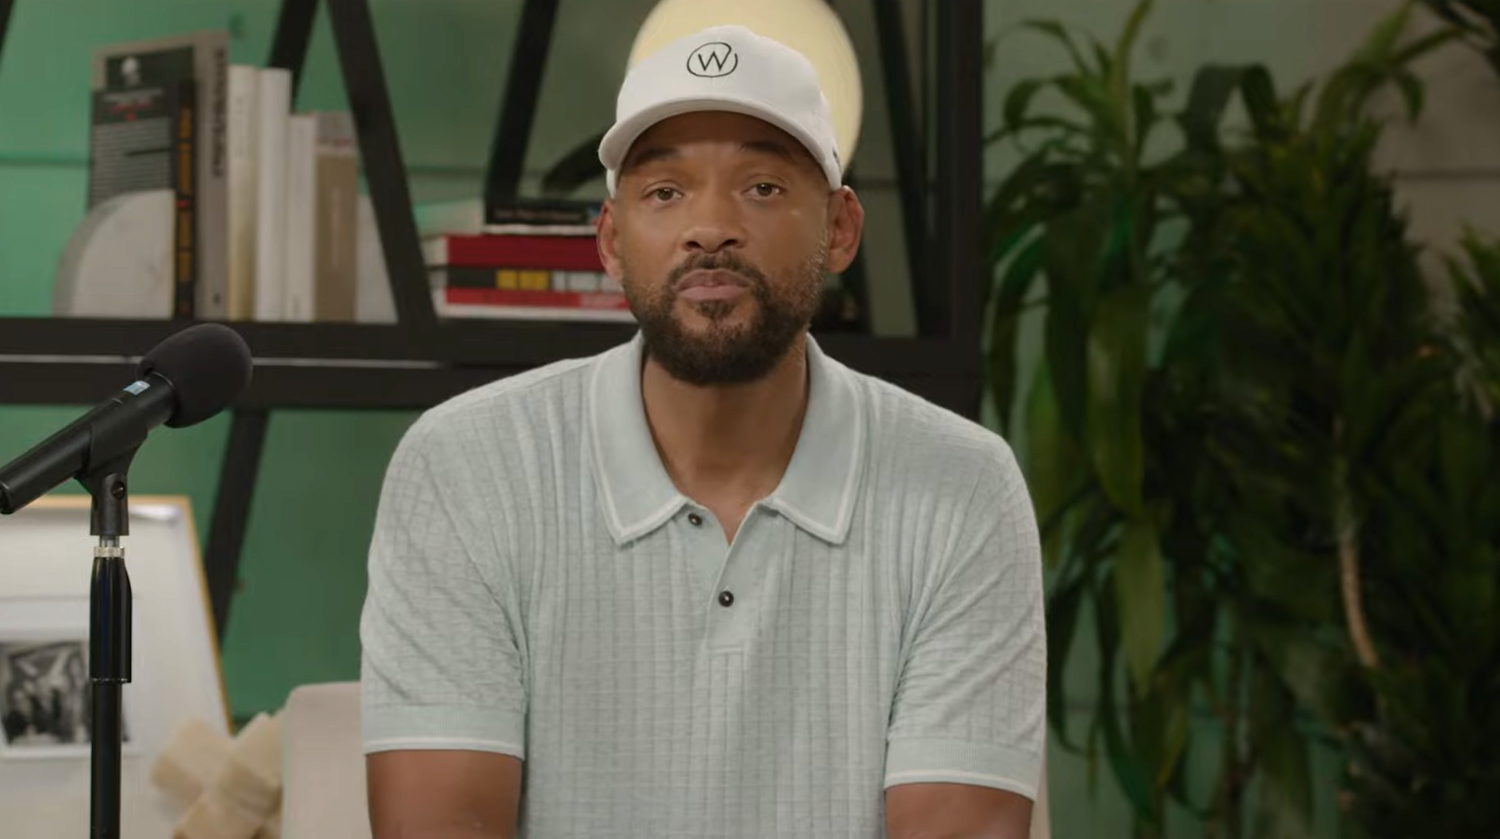 Will Smith in the apology video.